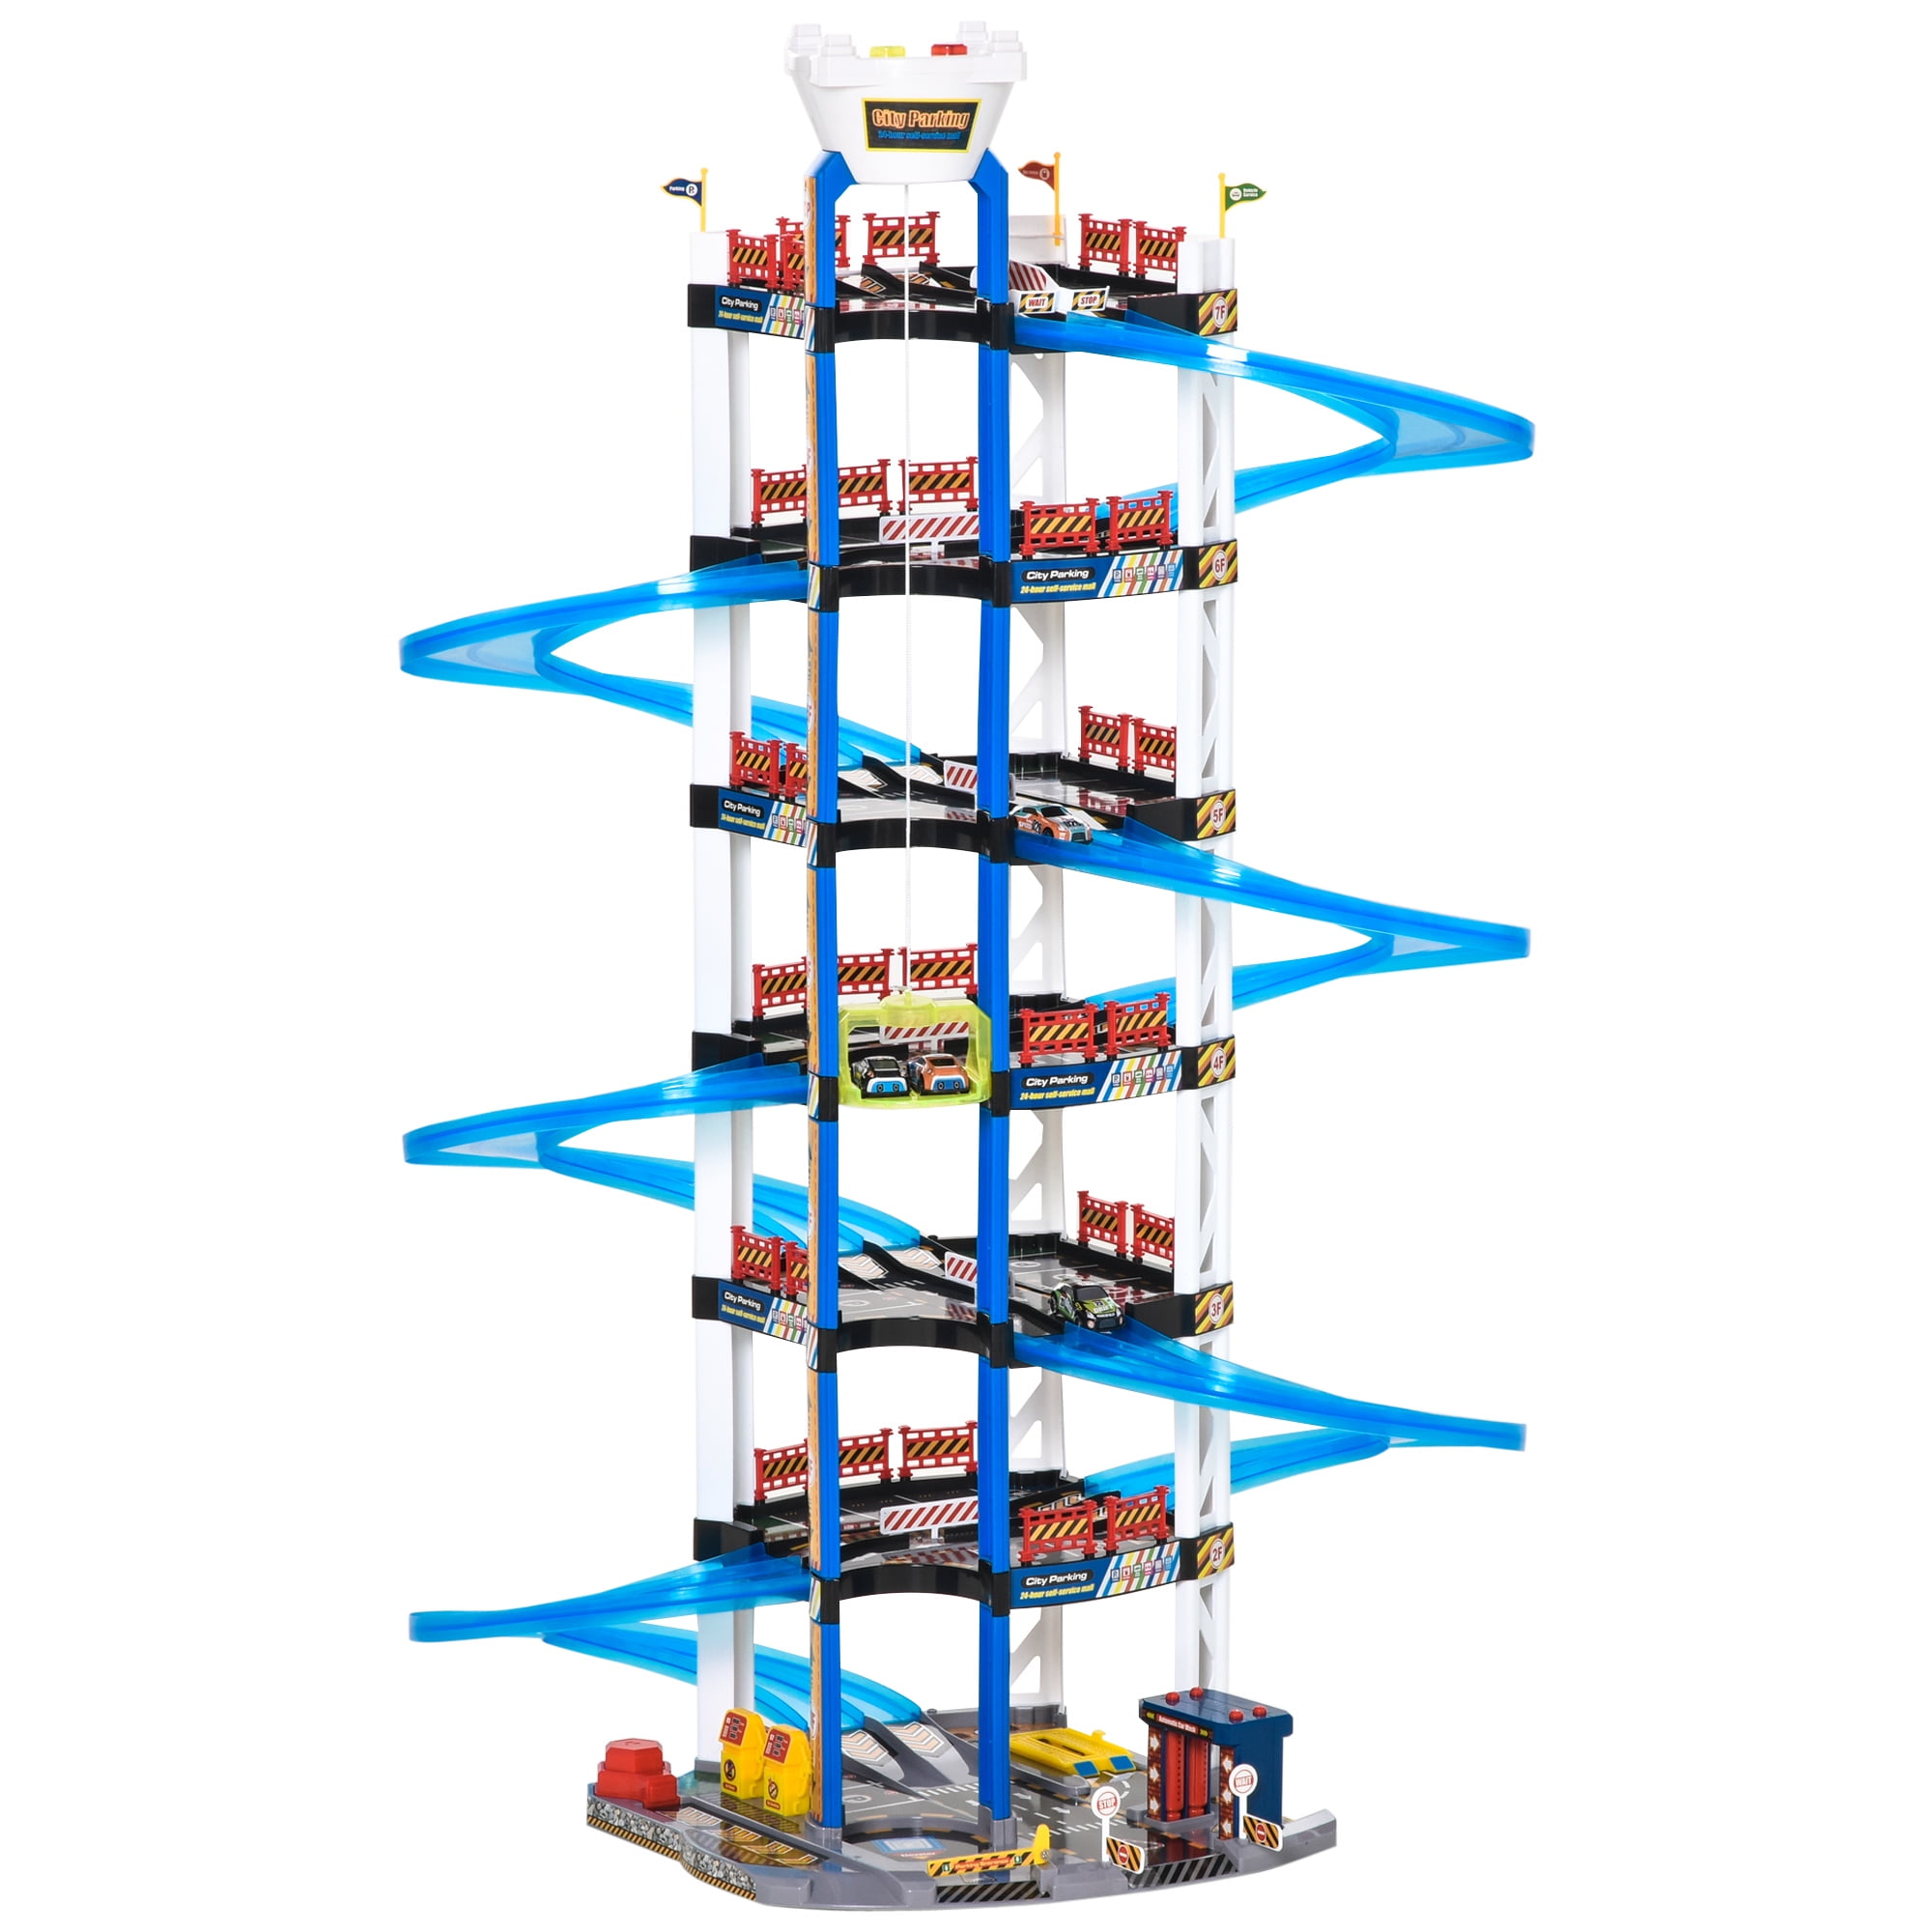 Car Ramp Toy for Boys UNIH Kids Toy Car Garage Toy Car Garage for Toddlers 4 Level Parking Lot Toys with Ramp Elevator and 6 Car Toy Set 